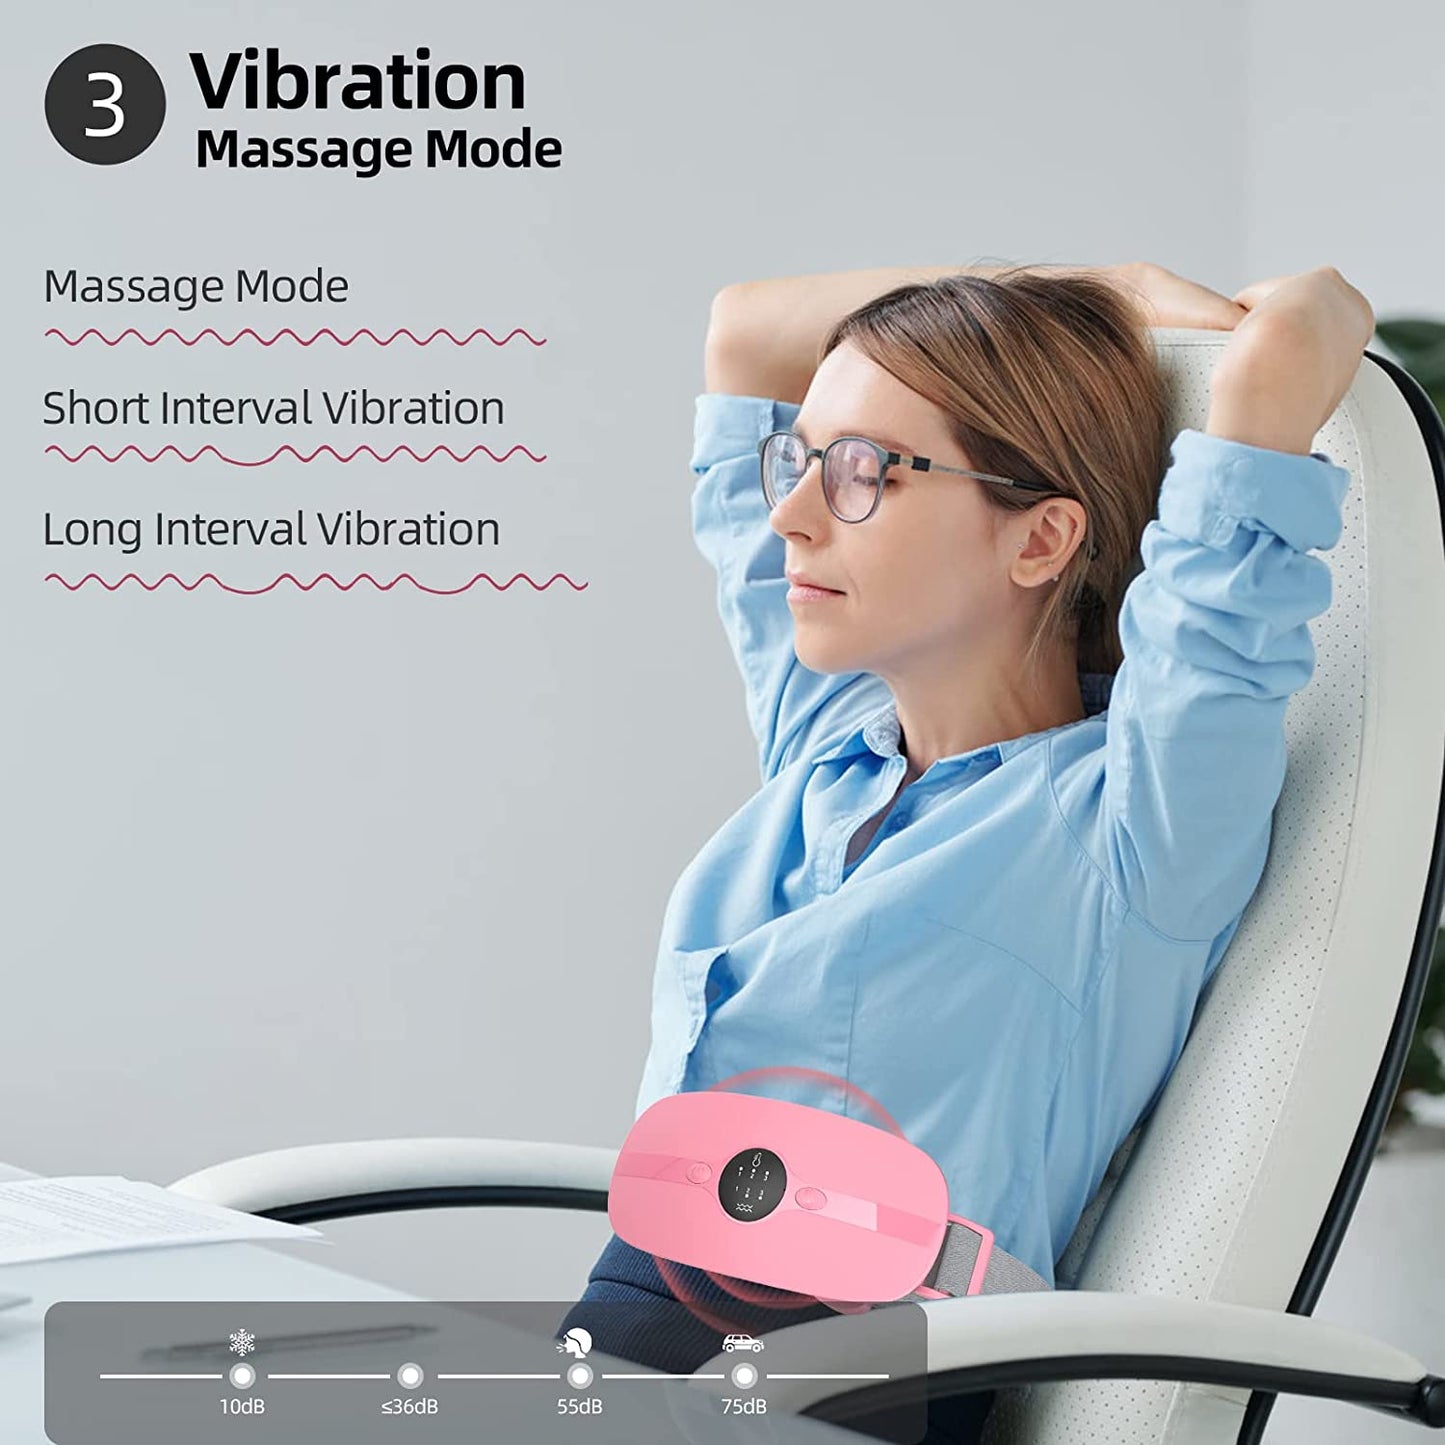 Portable Cordless Heating Pad, Menstrual Heating Pad with 3 Heat Levels and 3 Vibration Massage Modes, Fast Heating Belly Wrap Belt, Back or Belly Pain Relief Heating Pad for Women and Girl